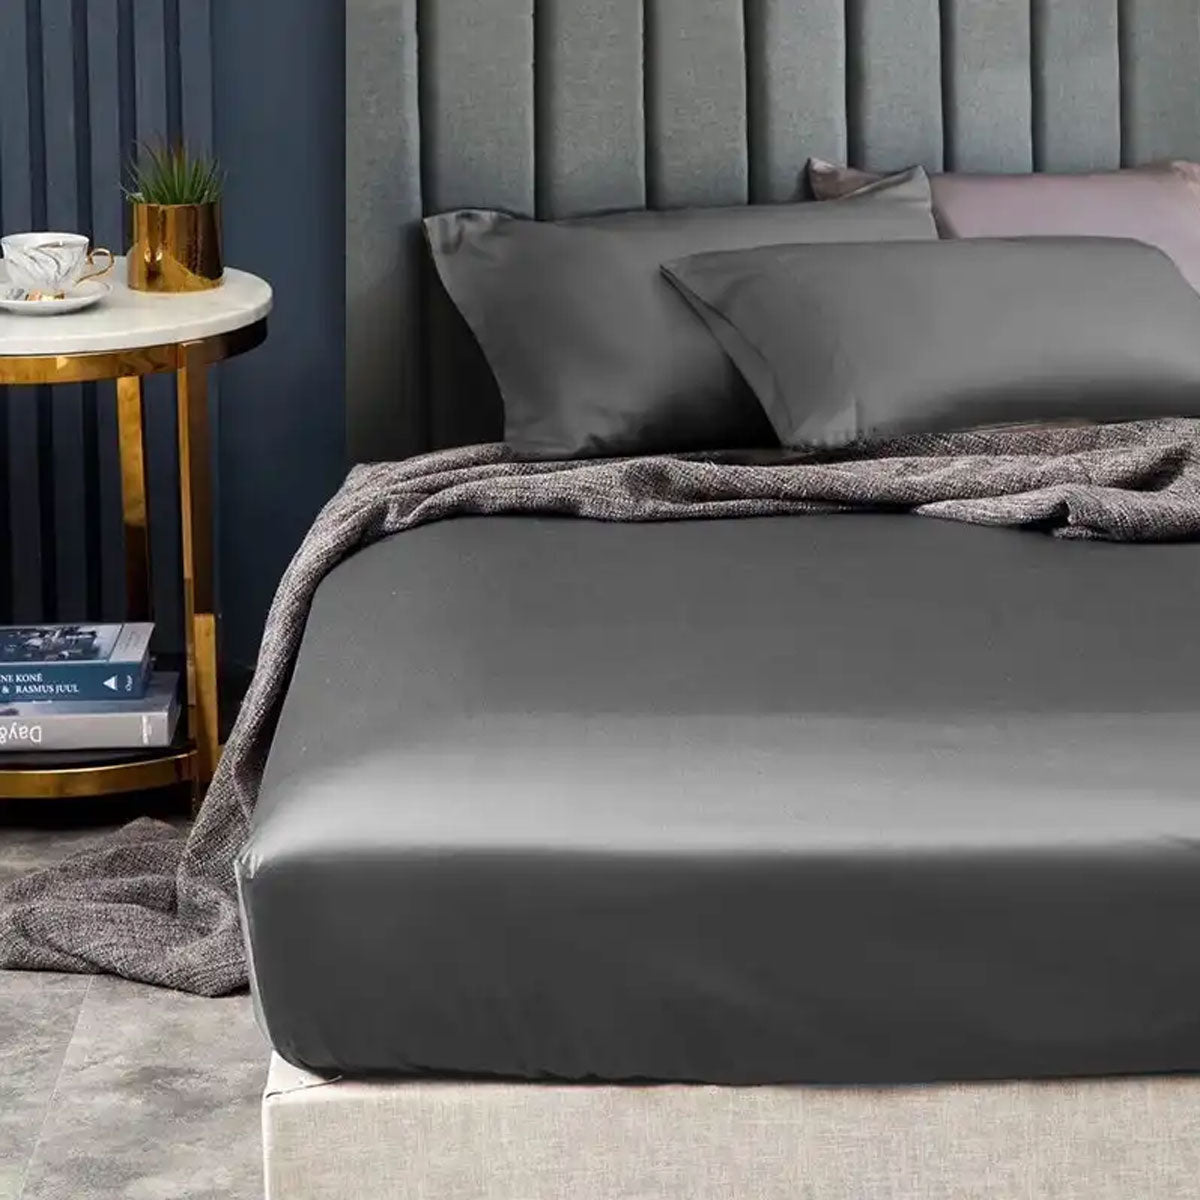 1500TC Elite Egyptian Cotton Sateen Fitted Sheet Combo Set Charcoal King